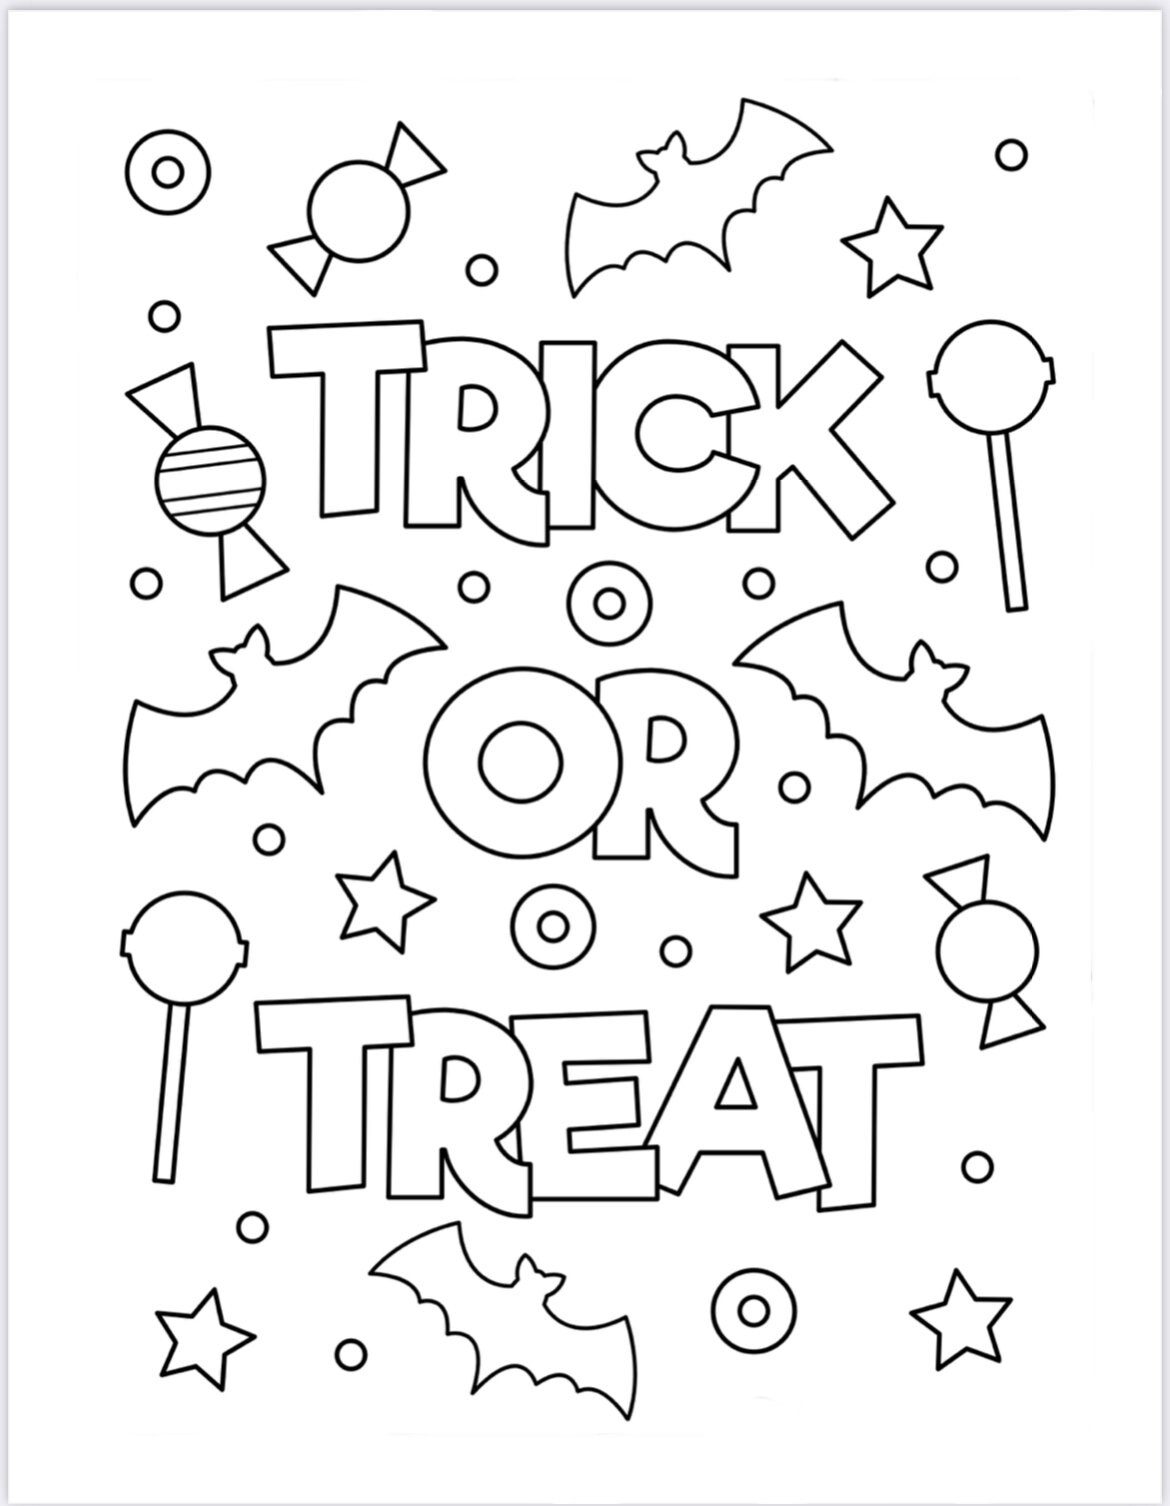 My First Halloween Coloring Book For Toddlers: Spooky Coloring Pages For  Children, A Safe Coloring Book For Markers (Halloween Books for Kids), Shop Today. Get it Tomorrow!